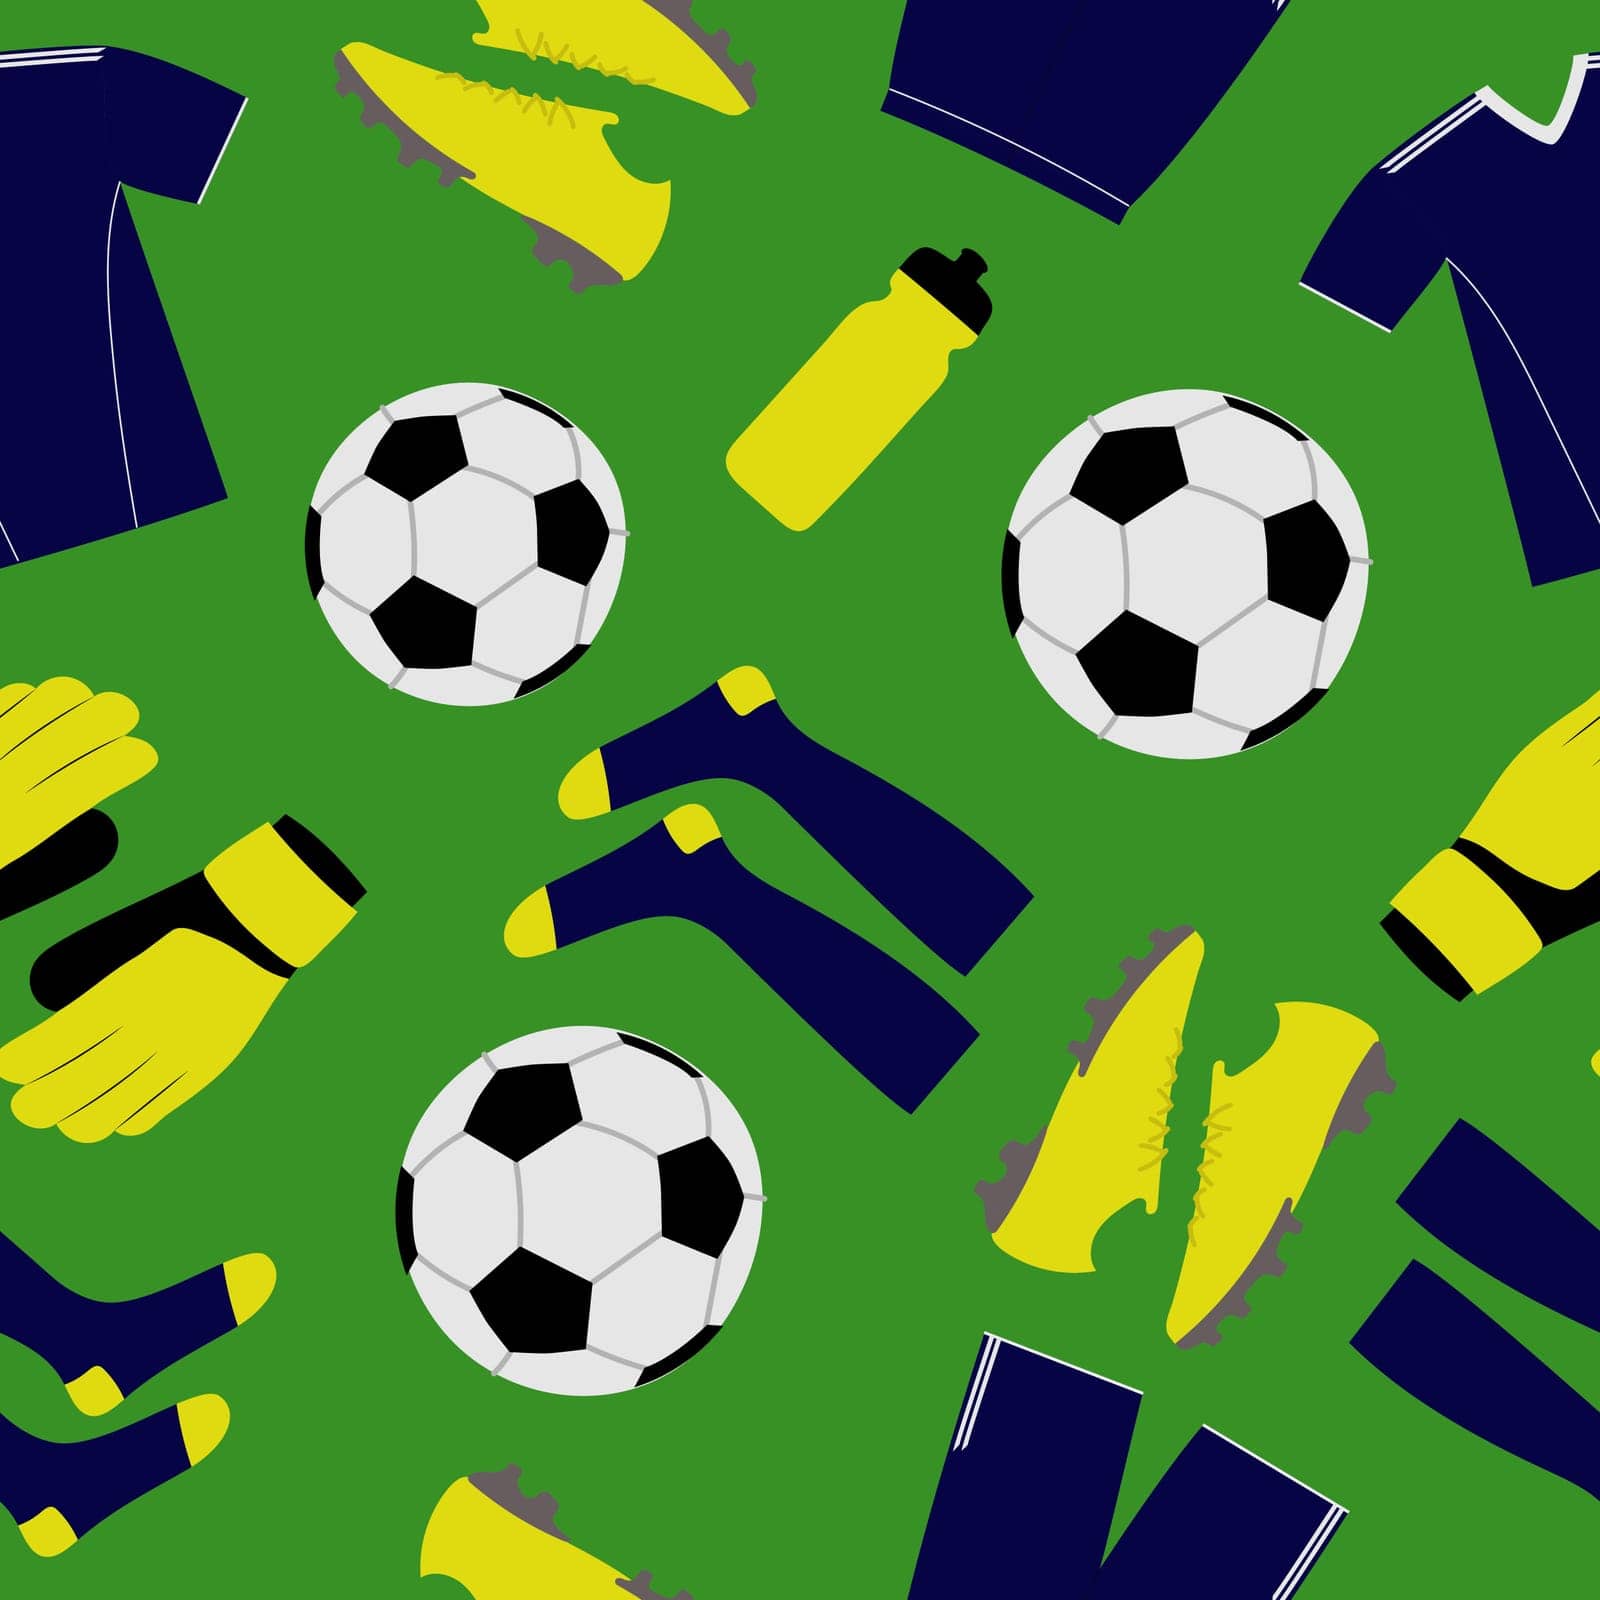 Seamless pattern of soccer equipment. Colorful objects on green background by Yarynabo